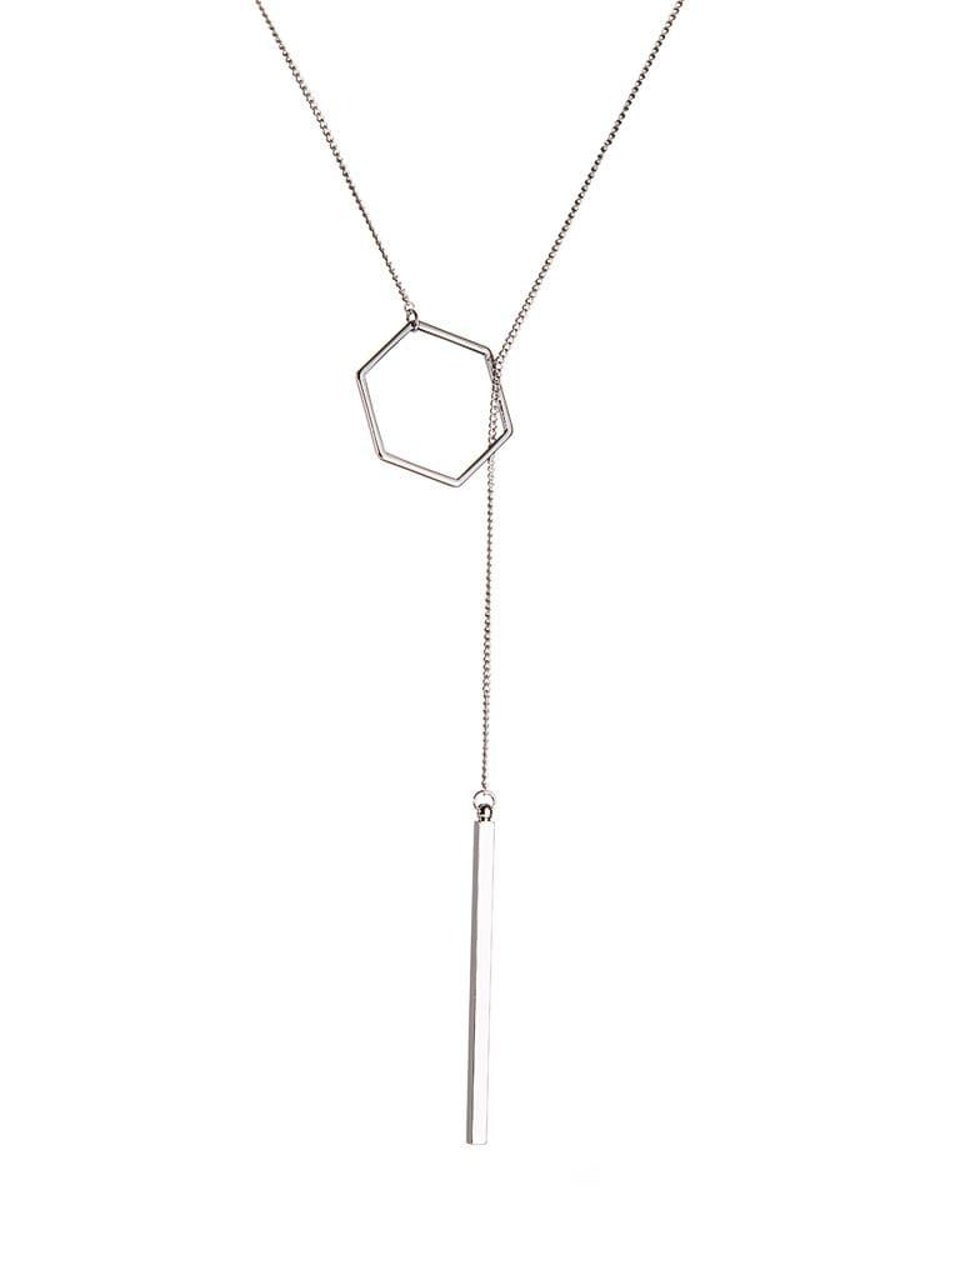 Silver Plated Necklace with Hexagon and Rod 72CM - Sterling Silver / Silver